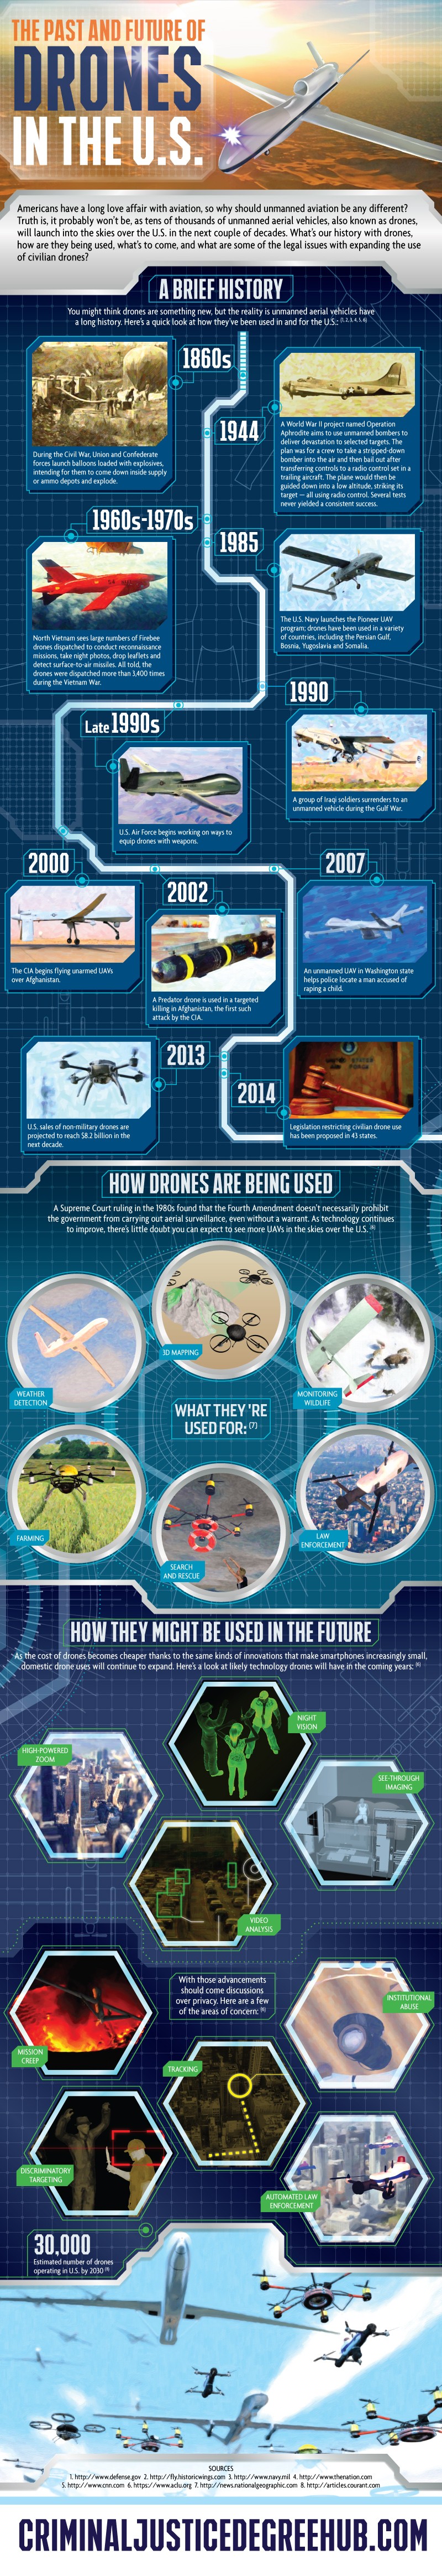 The Past and Future of Drones in the U.S. [Infographic]